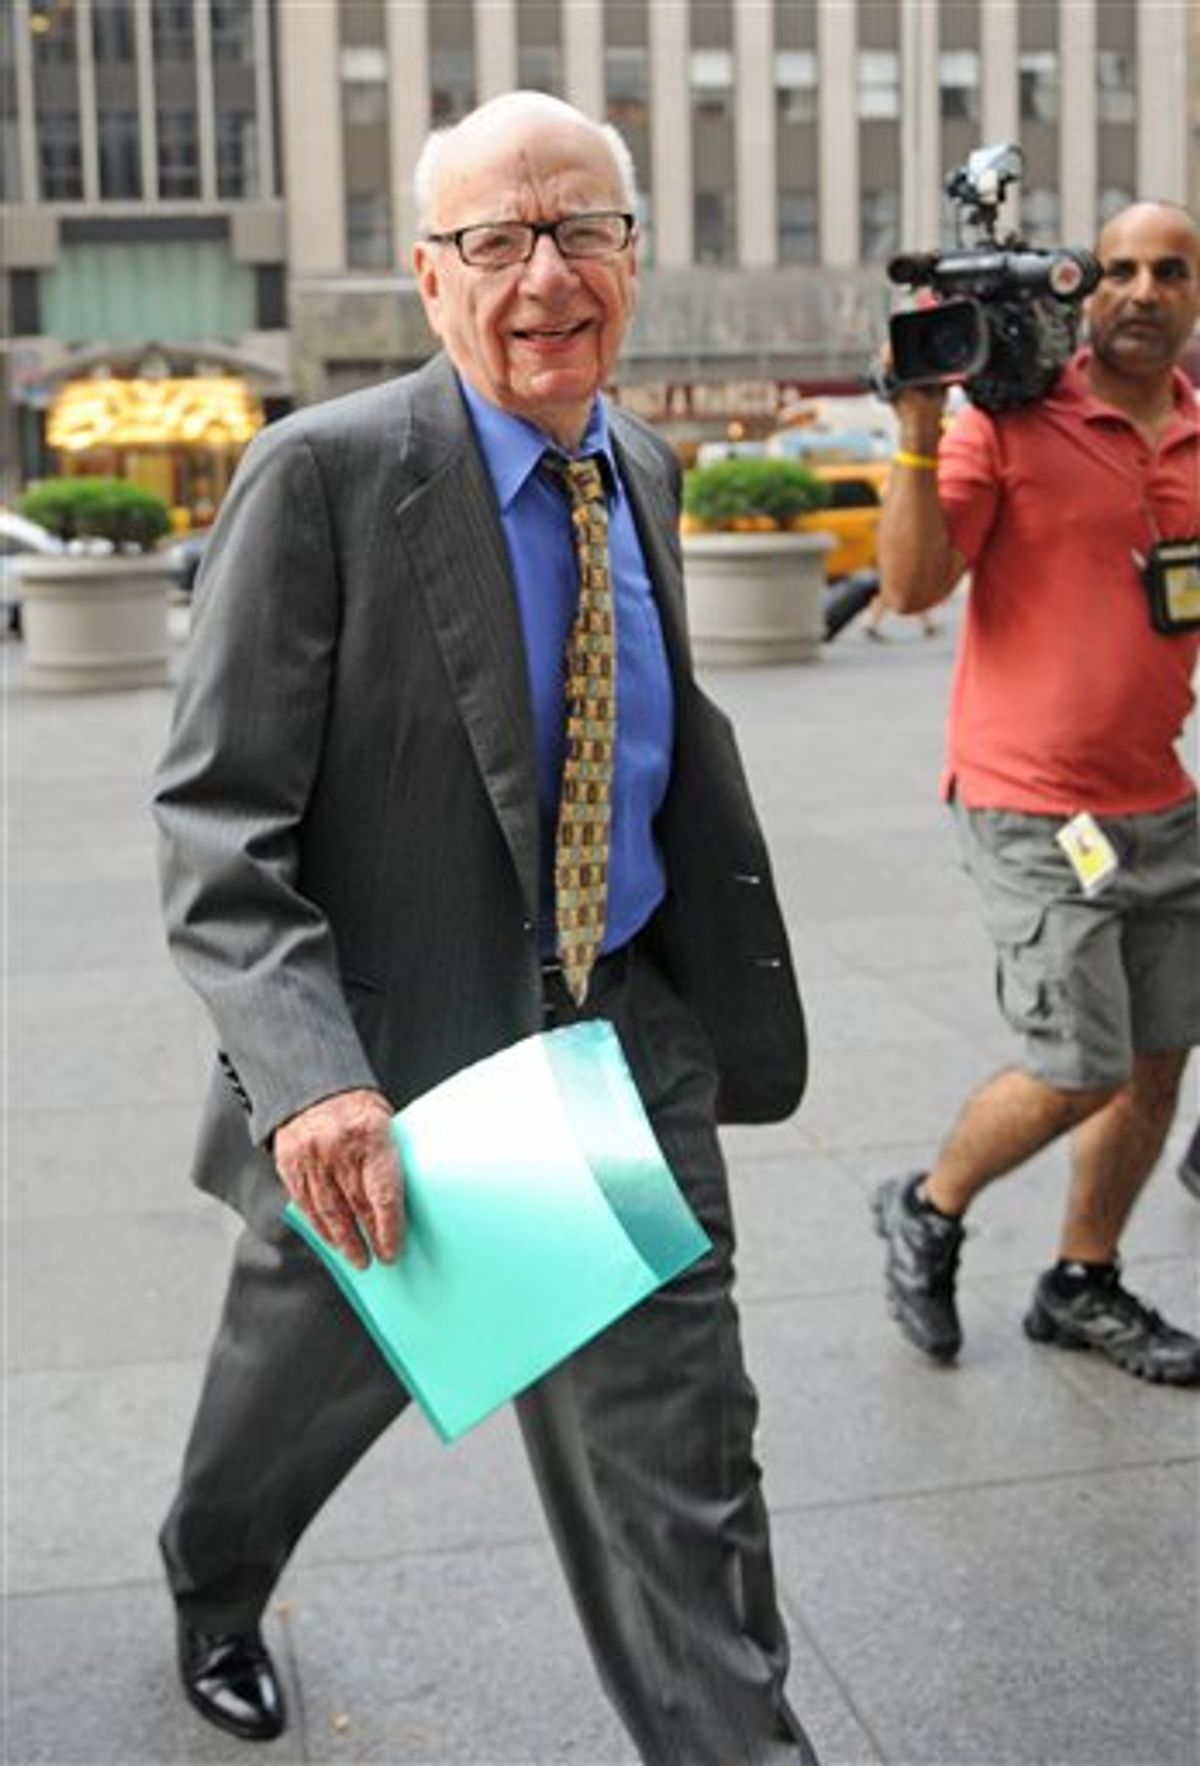 News Corporation head Rupert Murdoch enters the News Corp. building, Friday, July 22, 2011, in New York. (AP Photo/Louis Lanzano)    (AP)